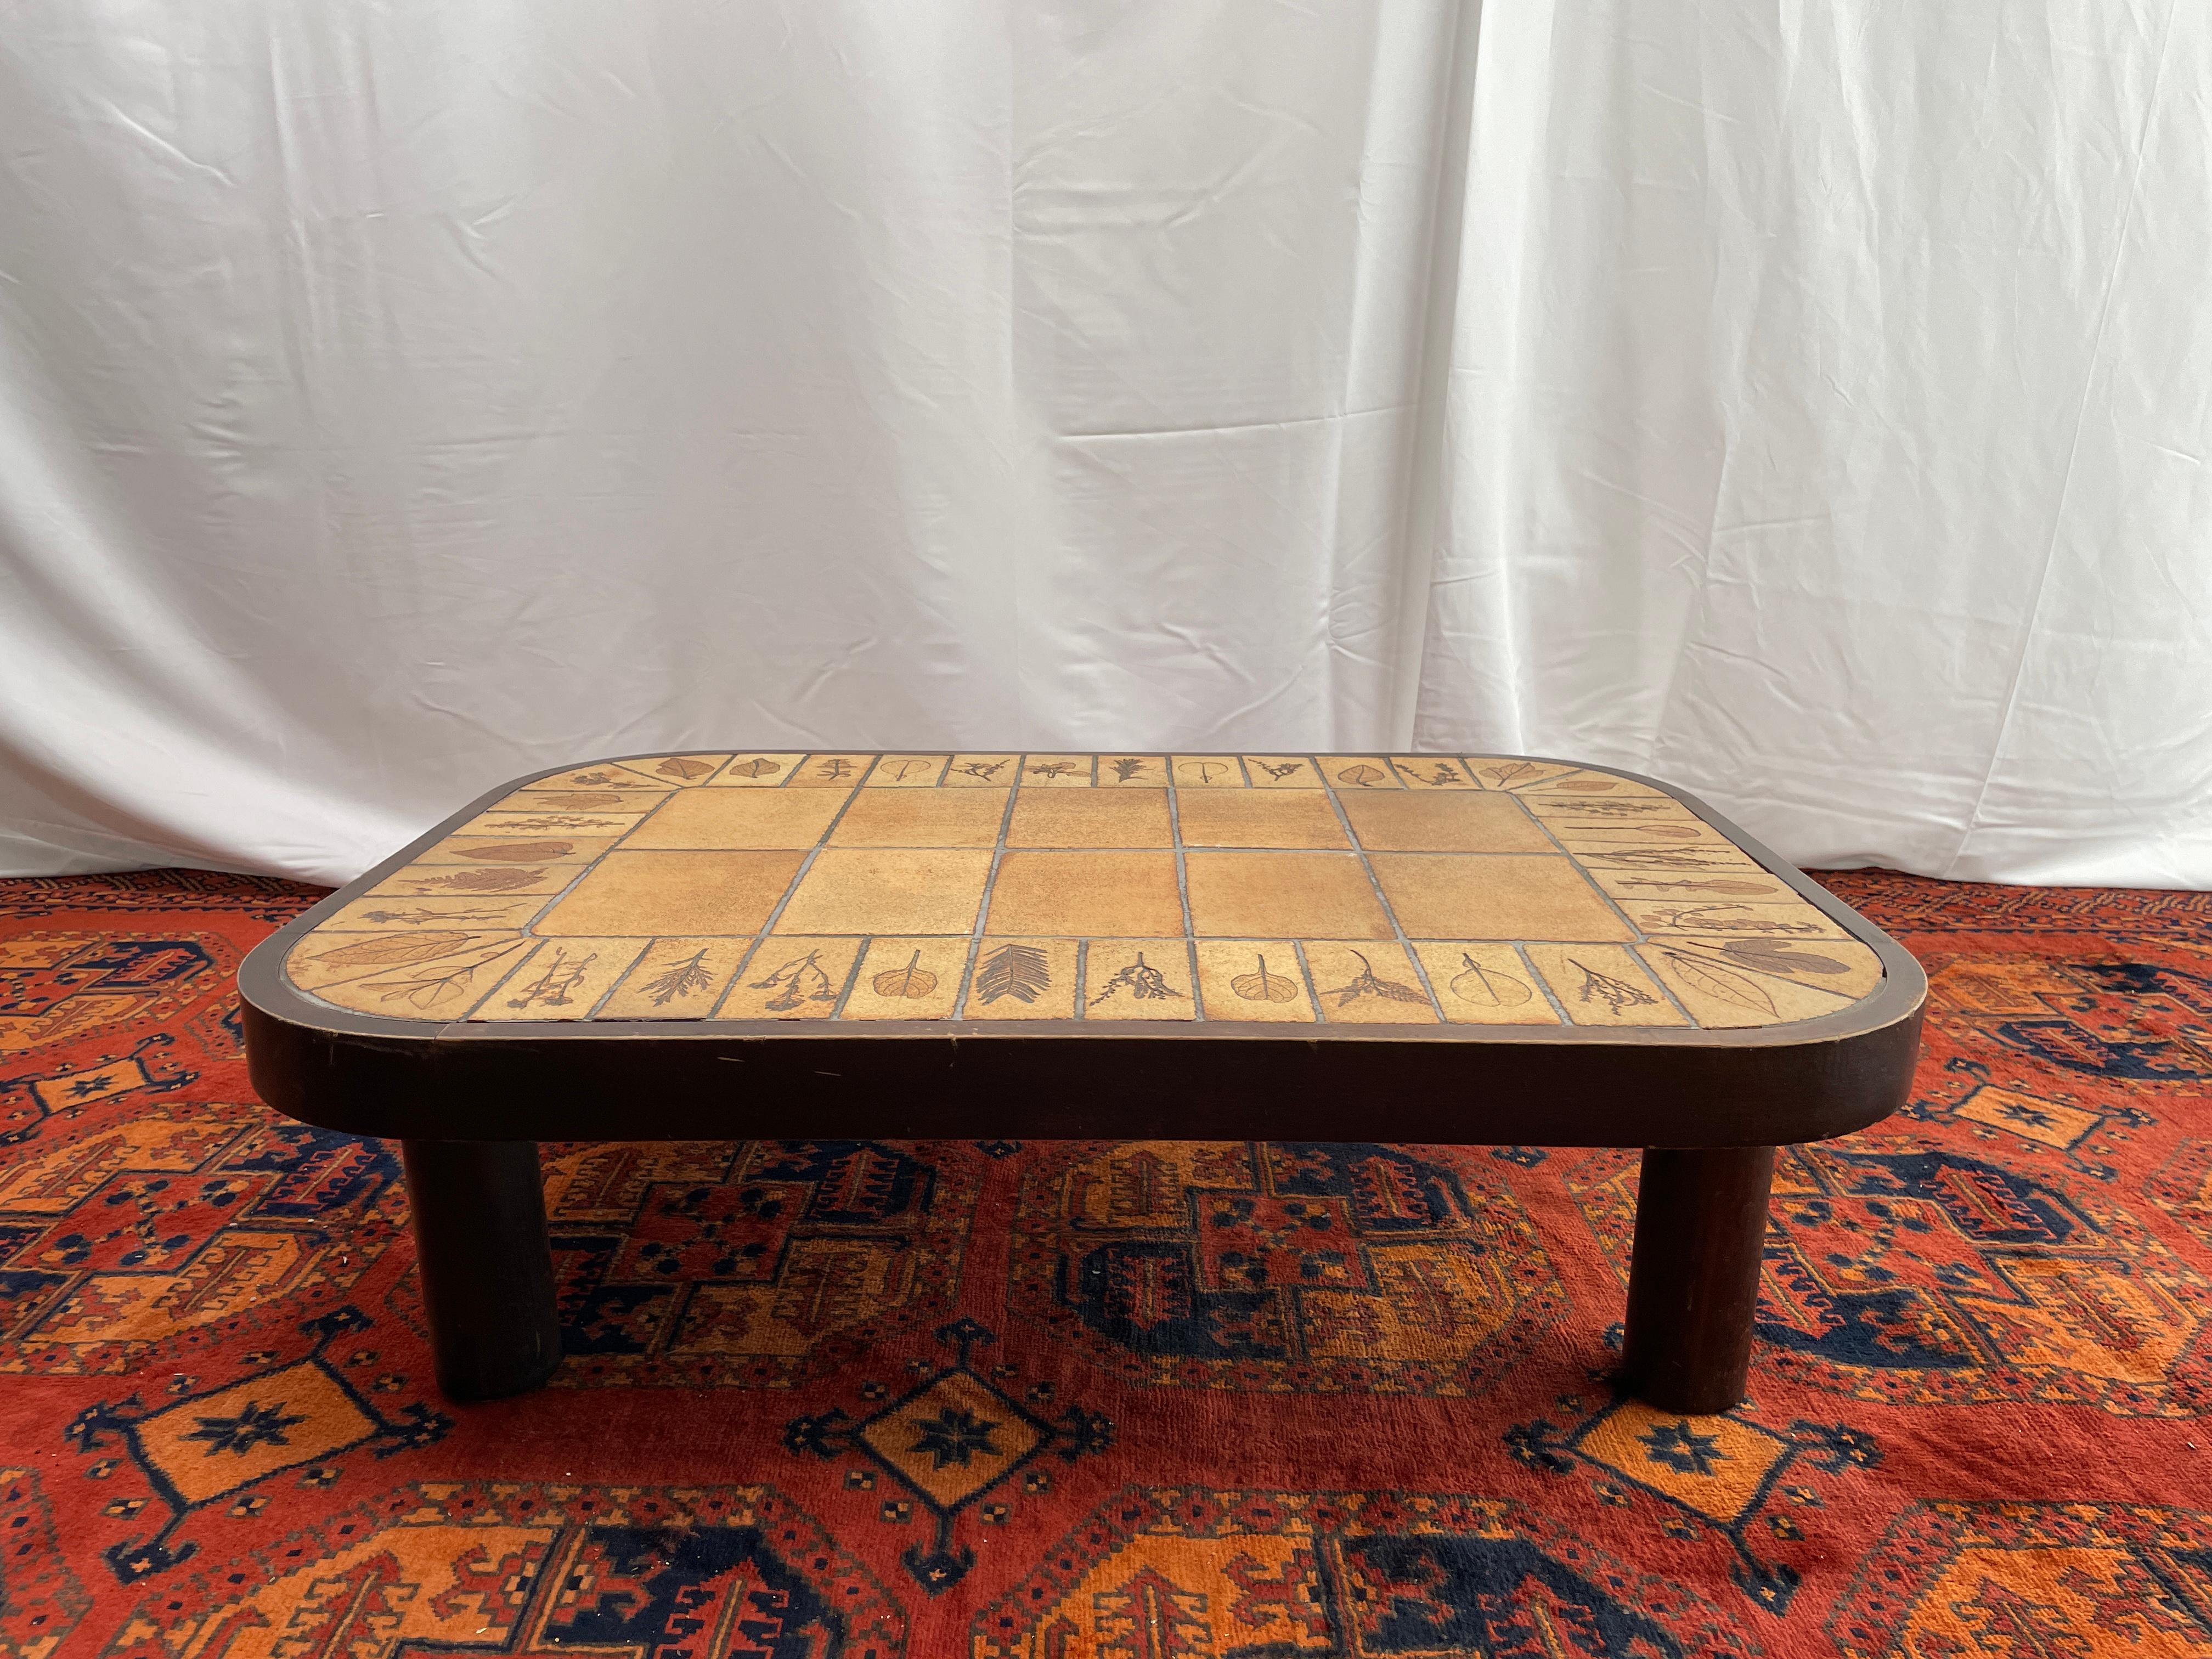 Coffee table from the garrigue series by the French designer Roger Capron for Vallauris, 1970s , good condition , the wood had some marks , but the Céramique is in very good conditions 

Roger Capron was born in Vincennes, France on September 4,